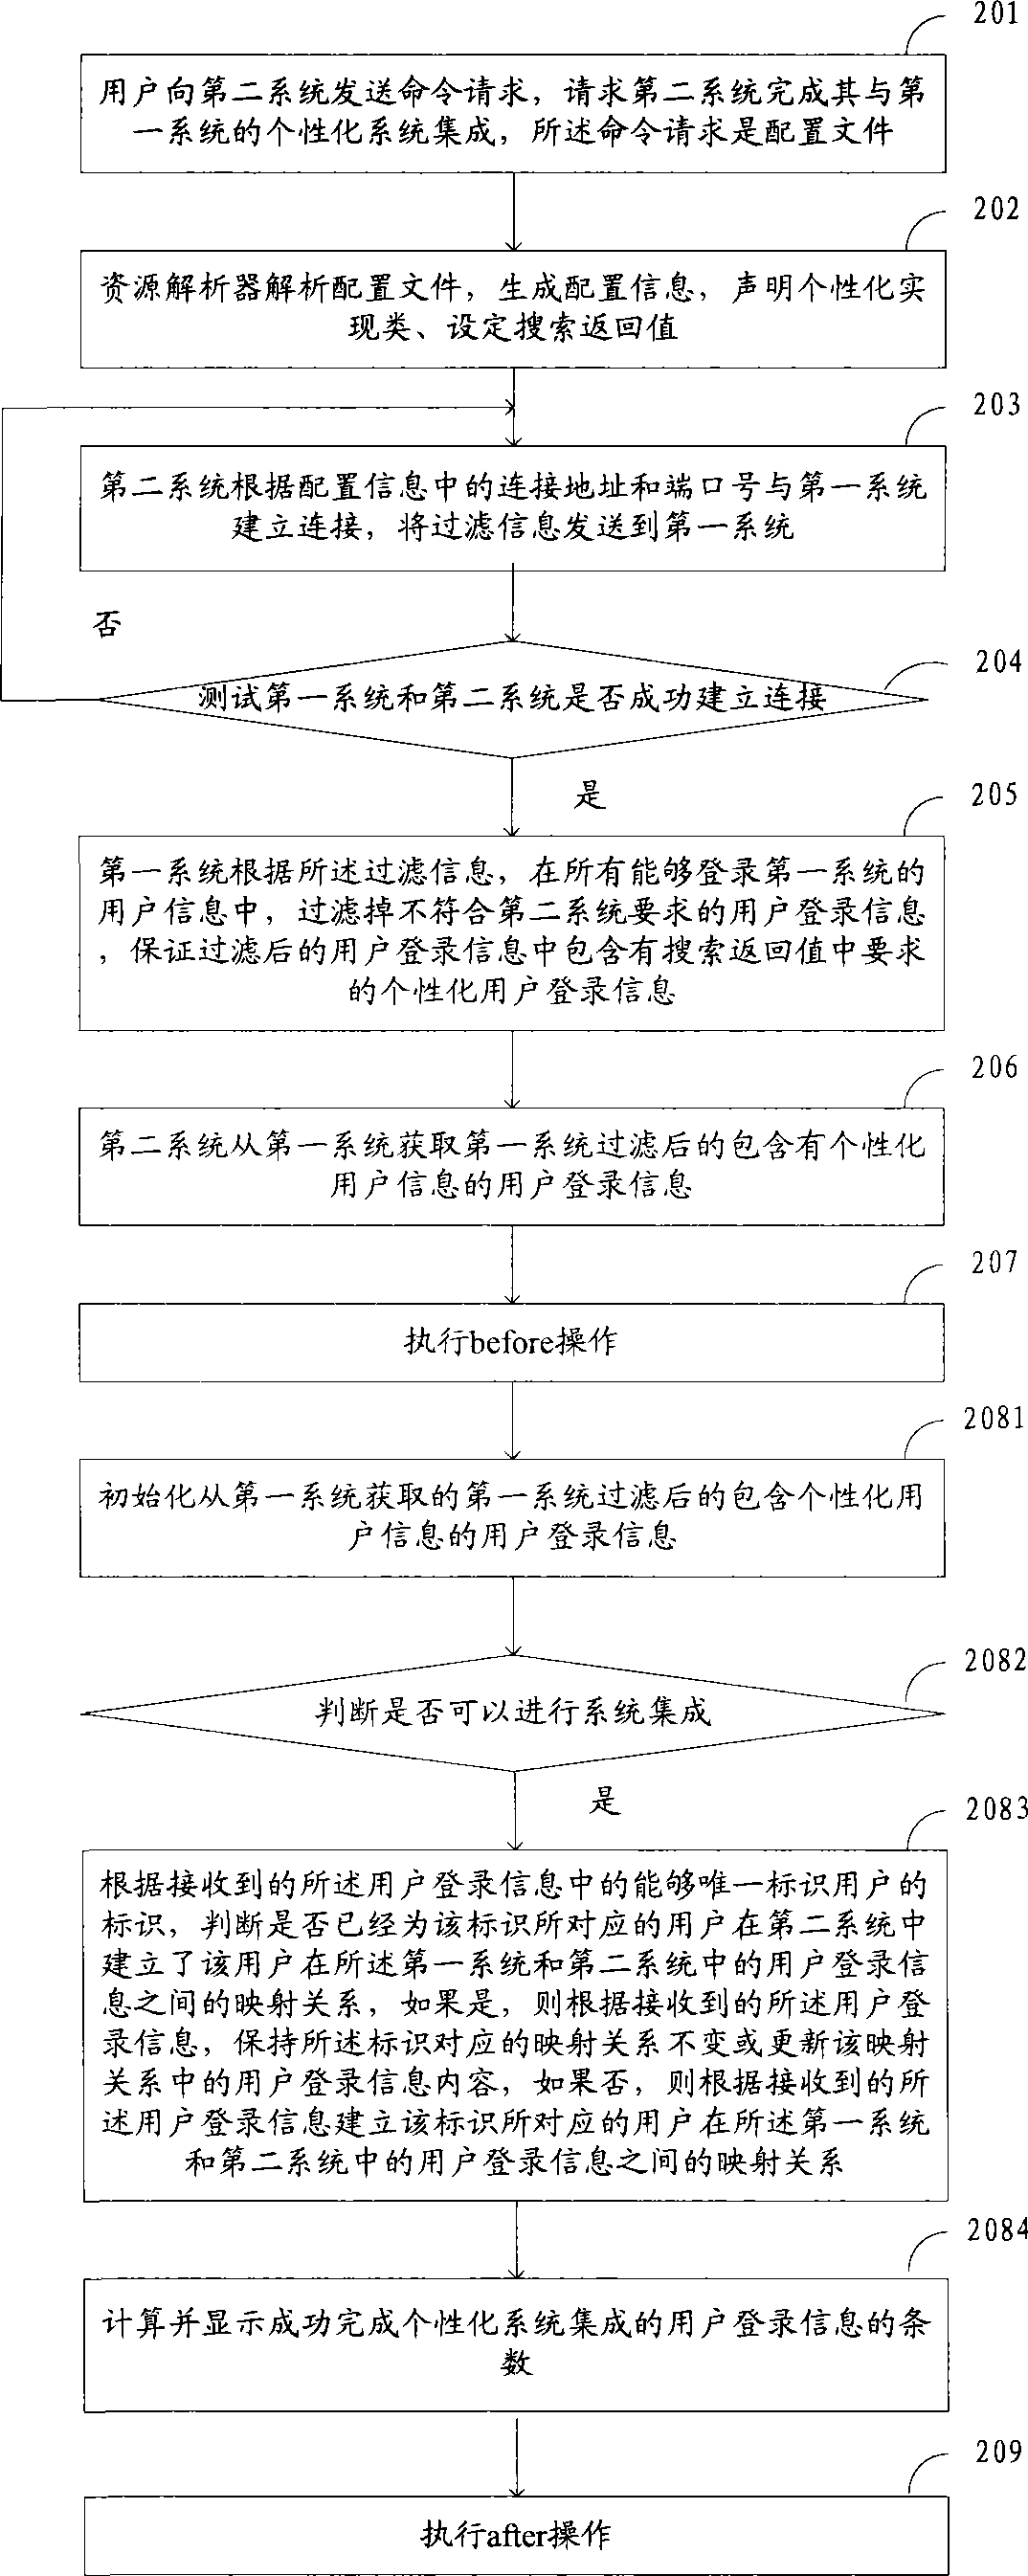 Method and system for customized system integration